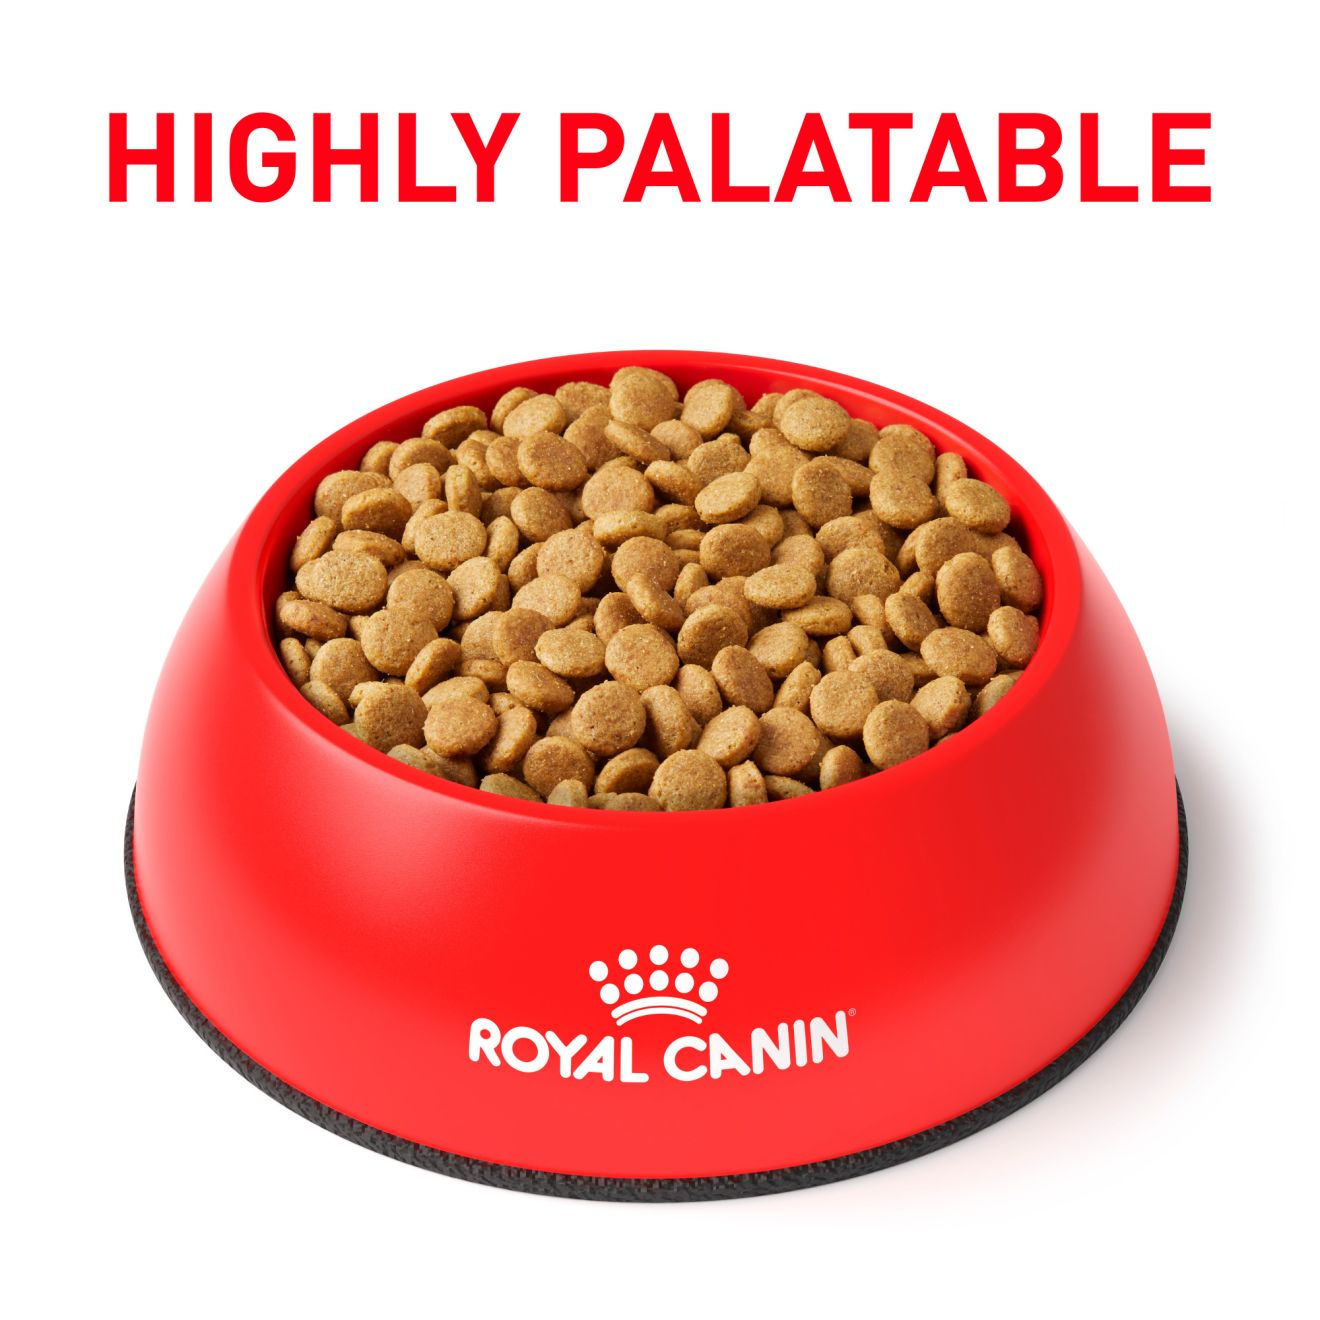 Royal Canin Hydrolyzed Protein Large Breed